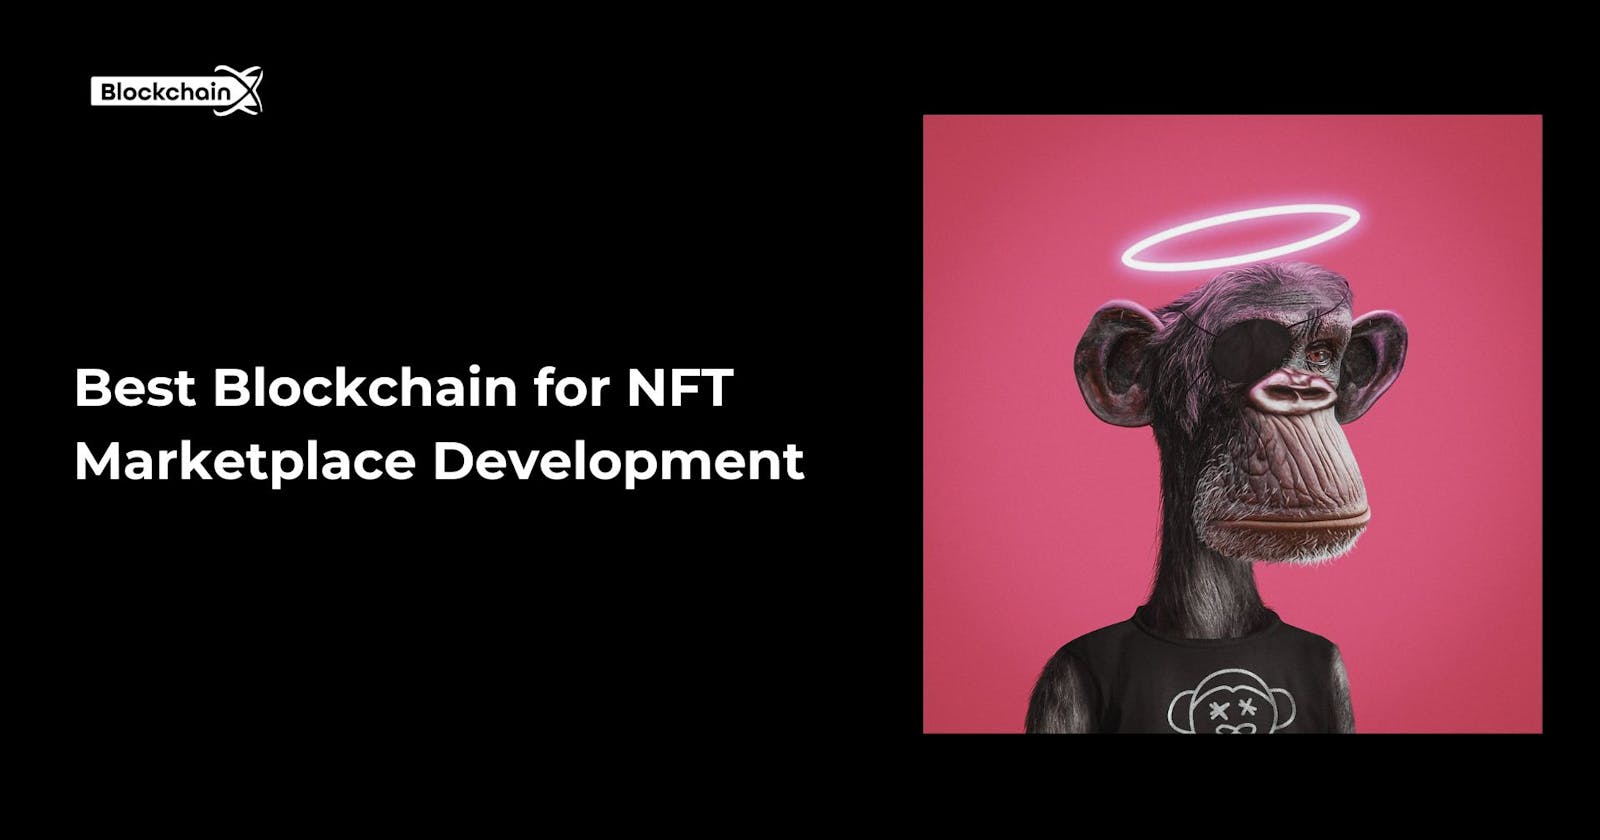 How to choose the best blockchain for NFT marketplace development?